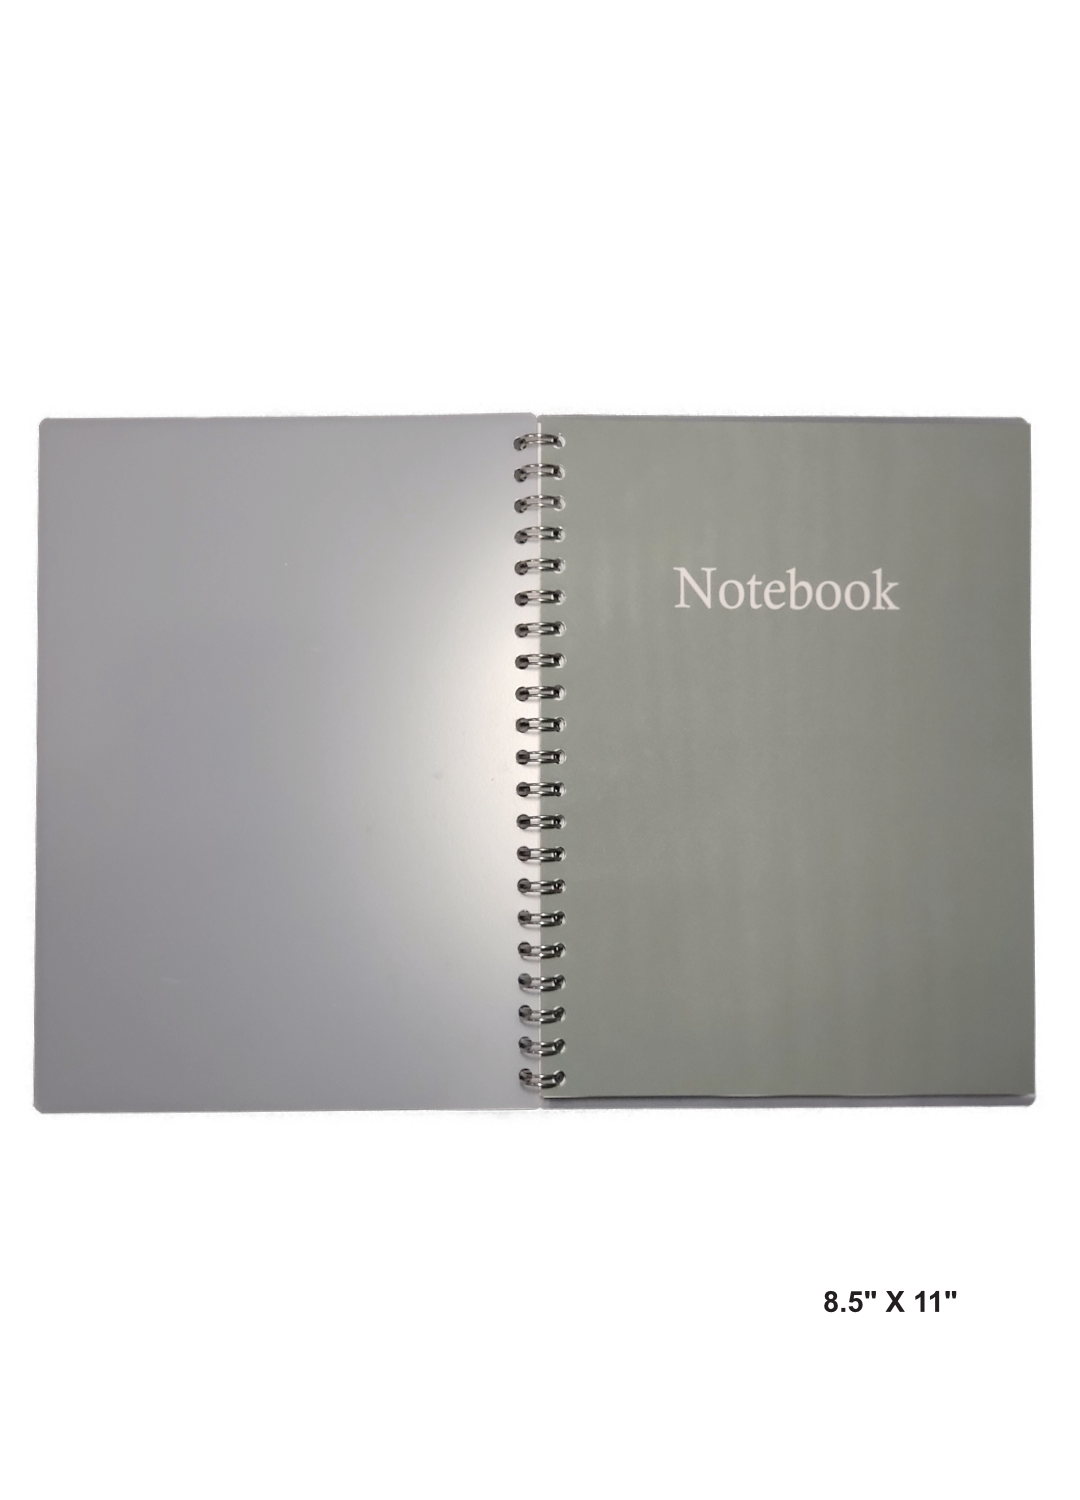 Image of hand-made 8.5" x 11" notebook with solid green color. The notebook's pages are lined for writing or journaling. 